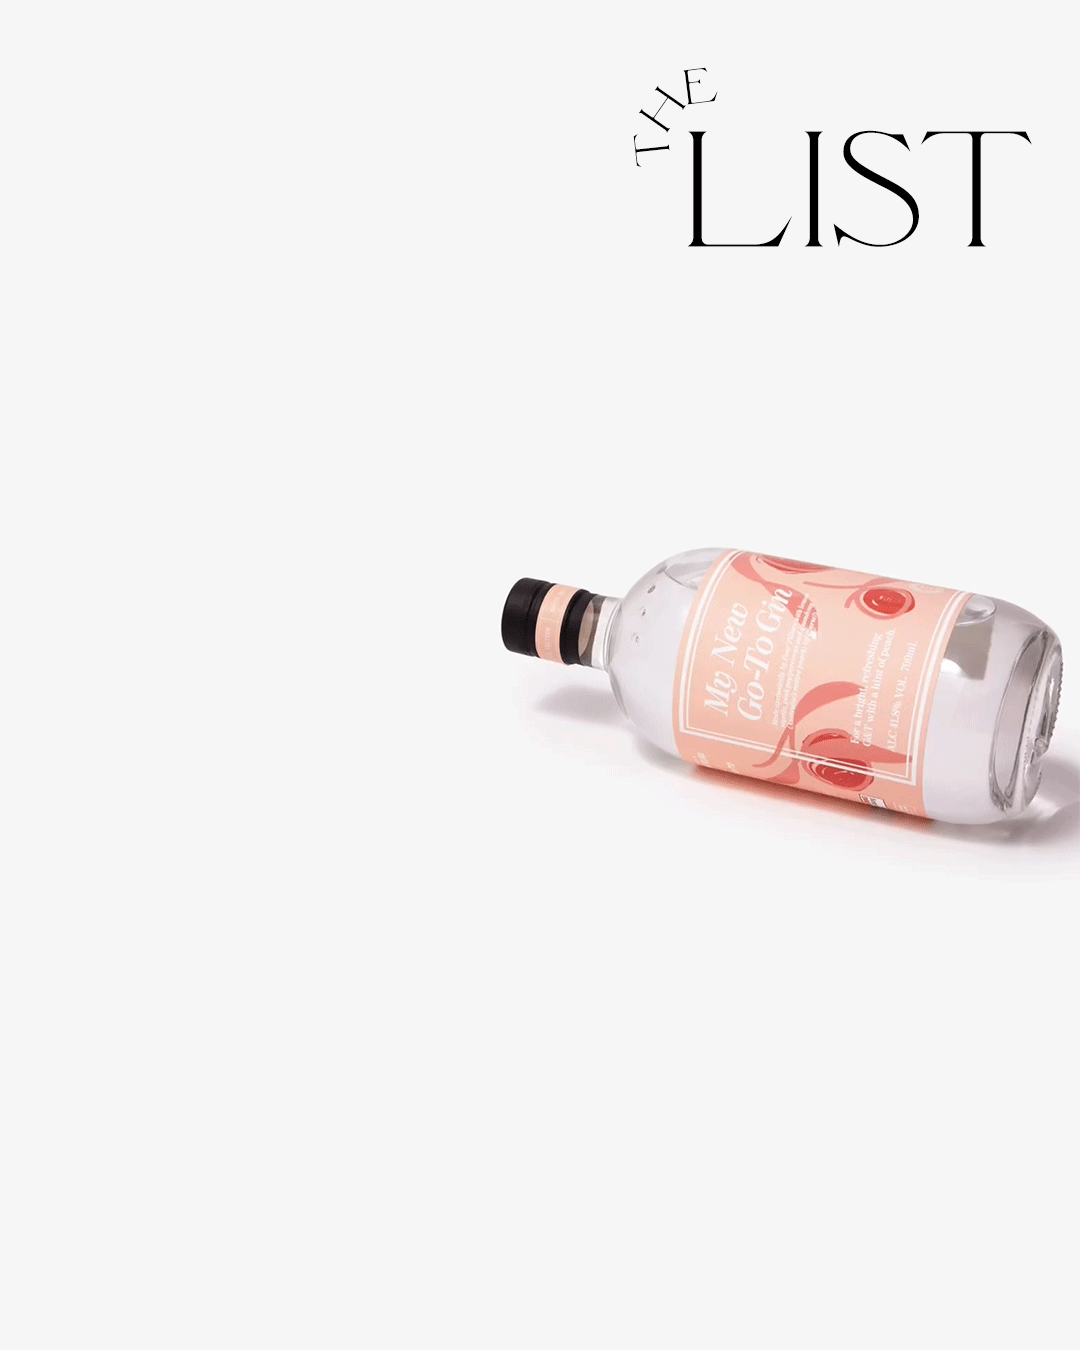 Go-To gin